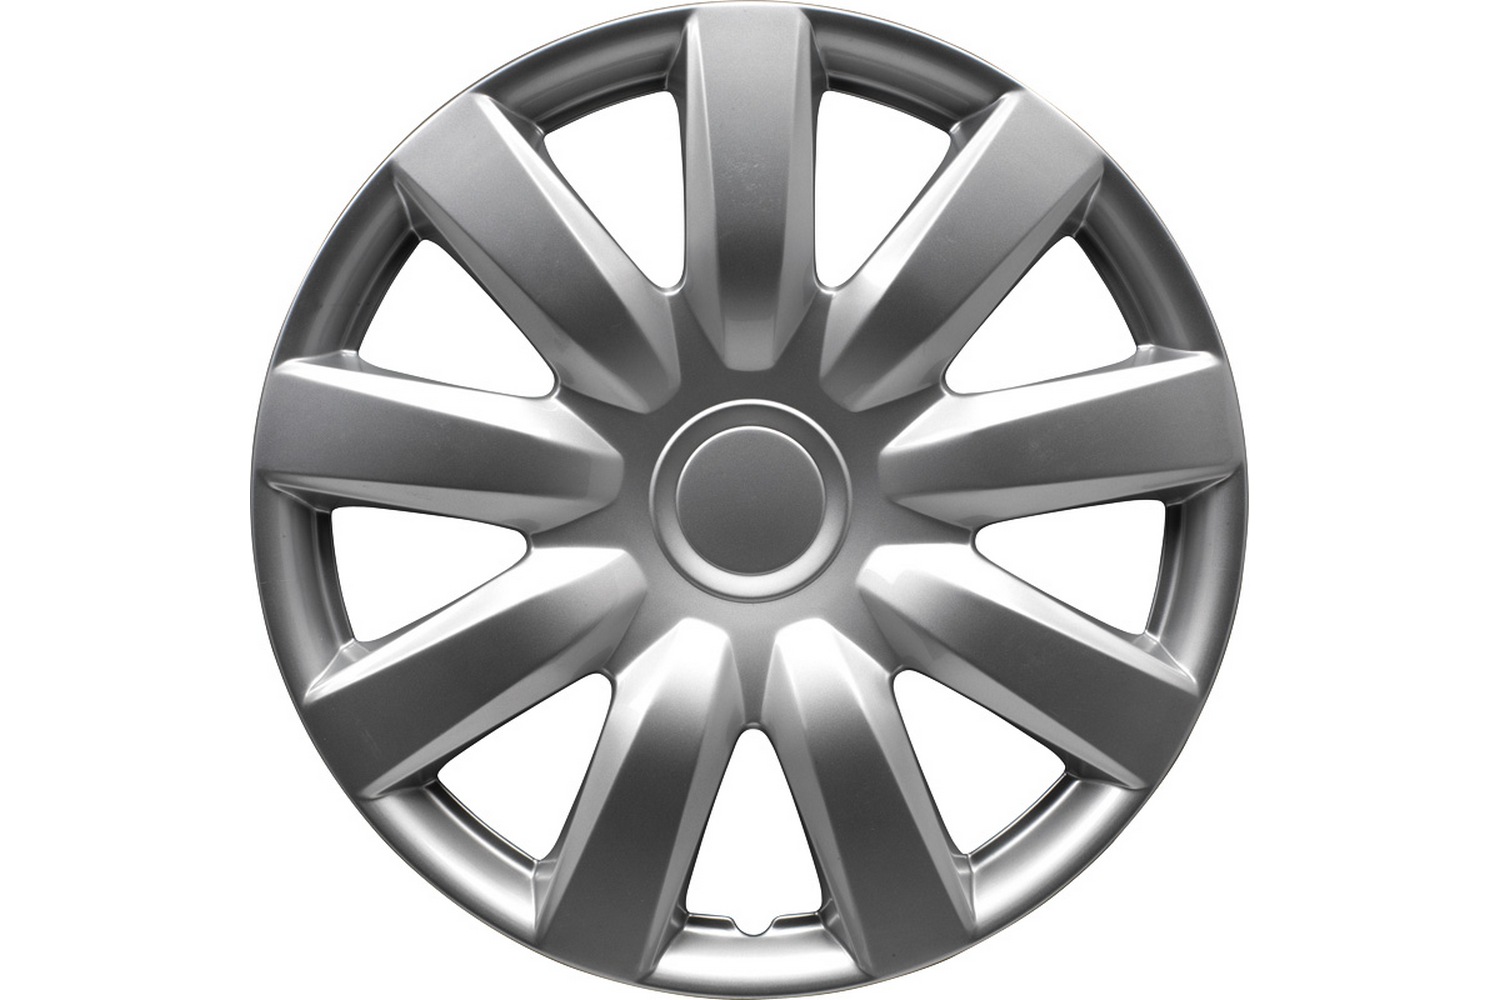 Wheel covers Alabama 13 inch set 4 pieces